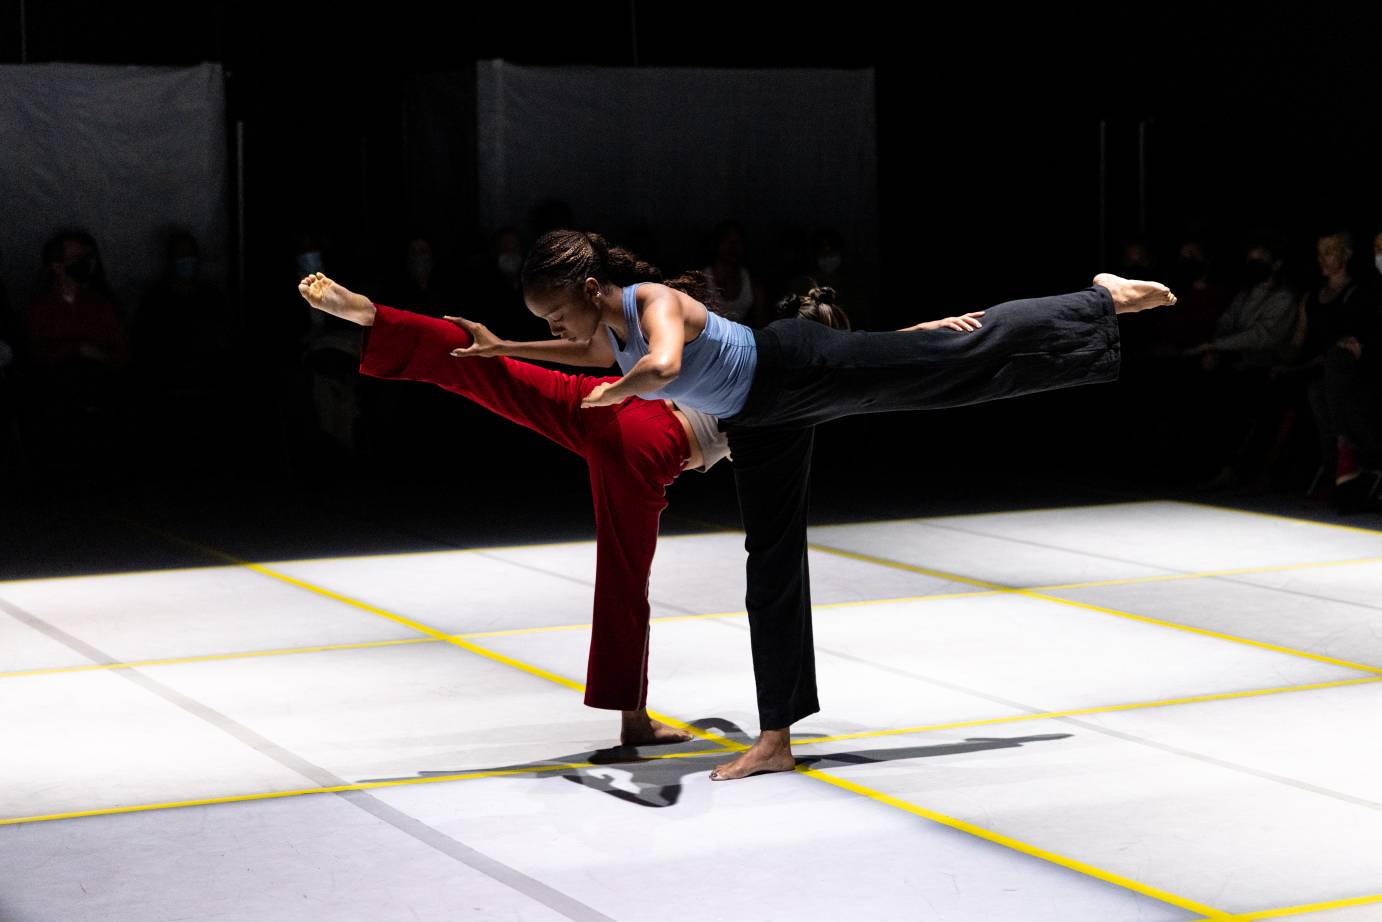 two dancers on a gray stage designed with yellow tape in rectangle shapes extend their legs in arabesque one facing left the other facing right. The hold on to one anothers out streched legs